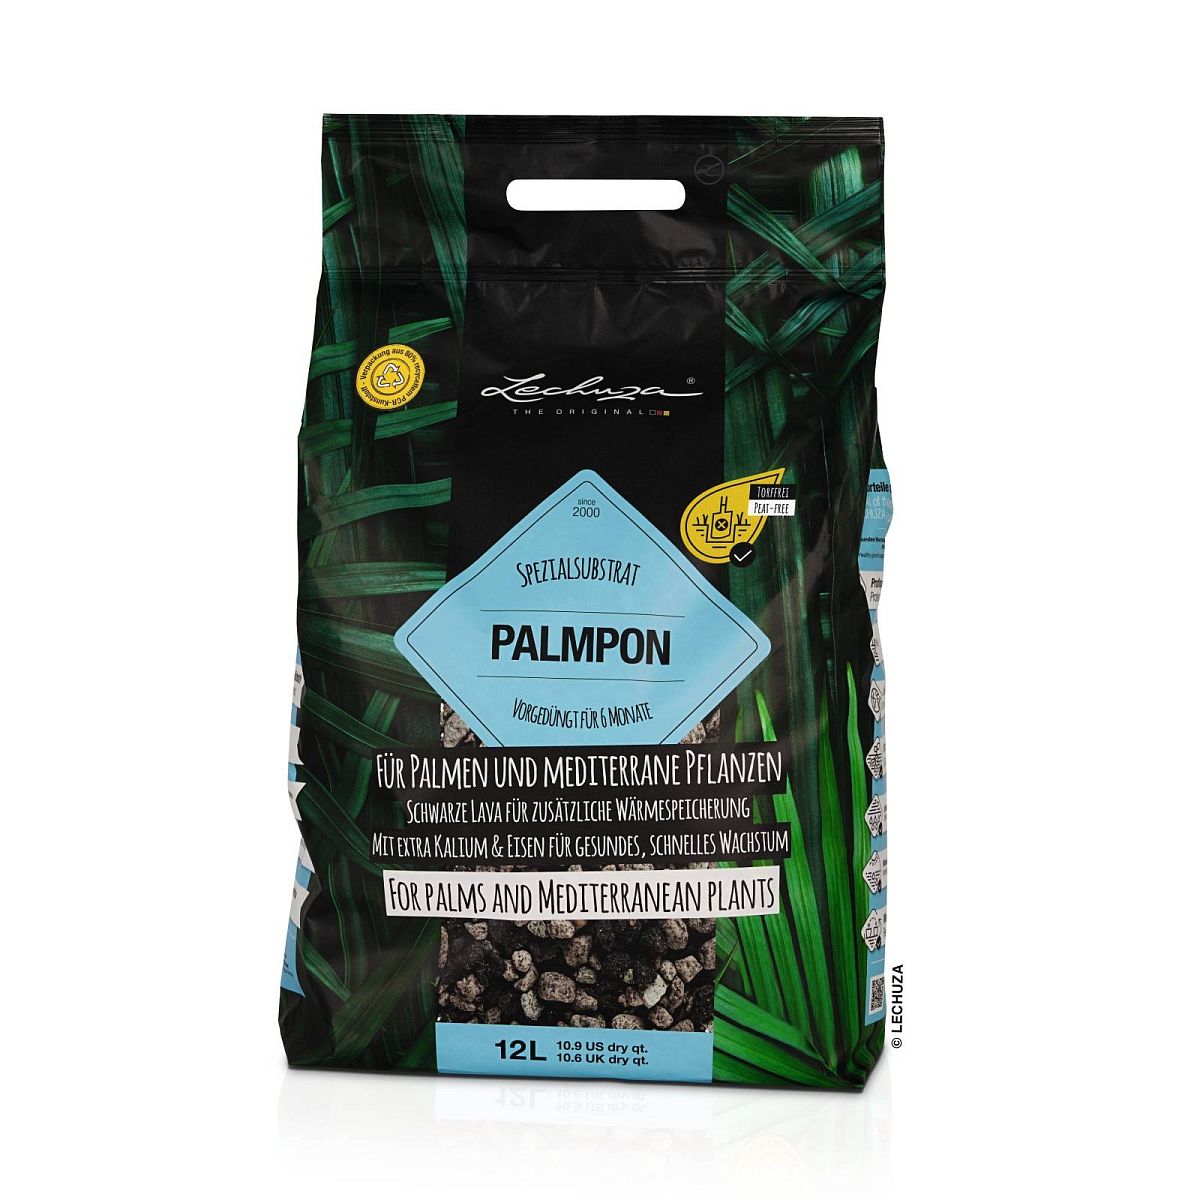 LECHUZA PALMPON Potting Soil Compost for Palms and Mediterranean Plants Potting Mix